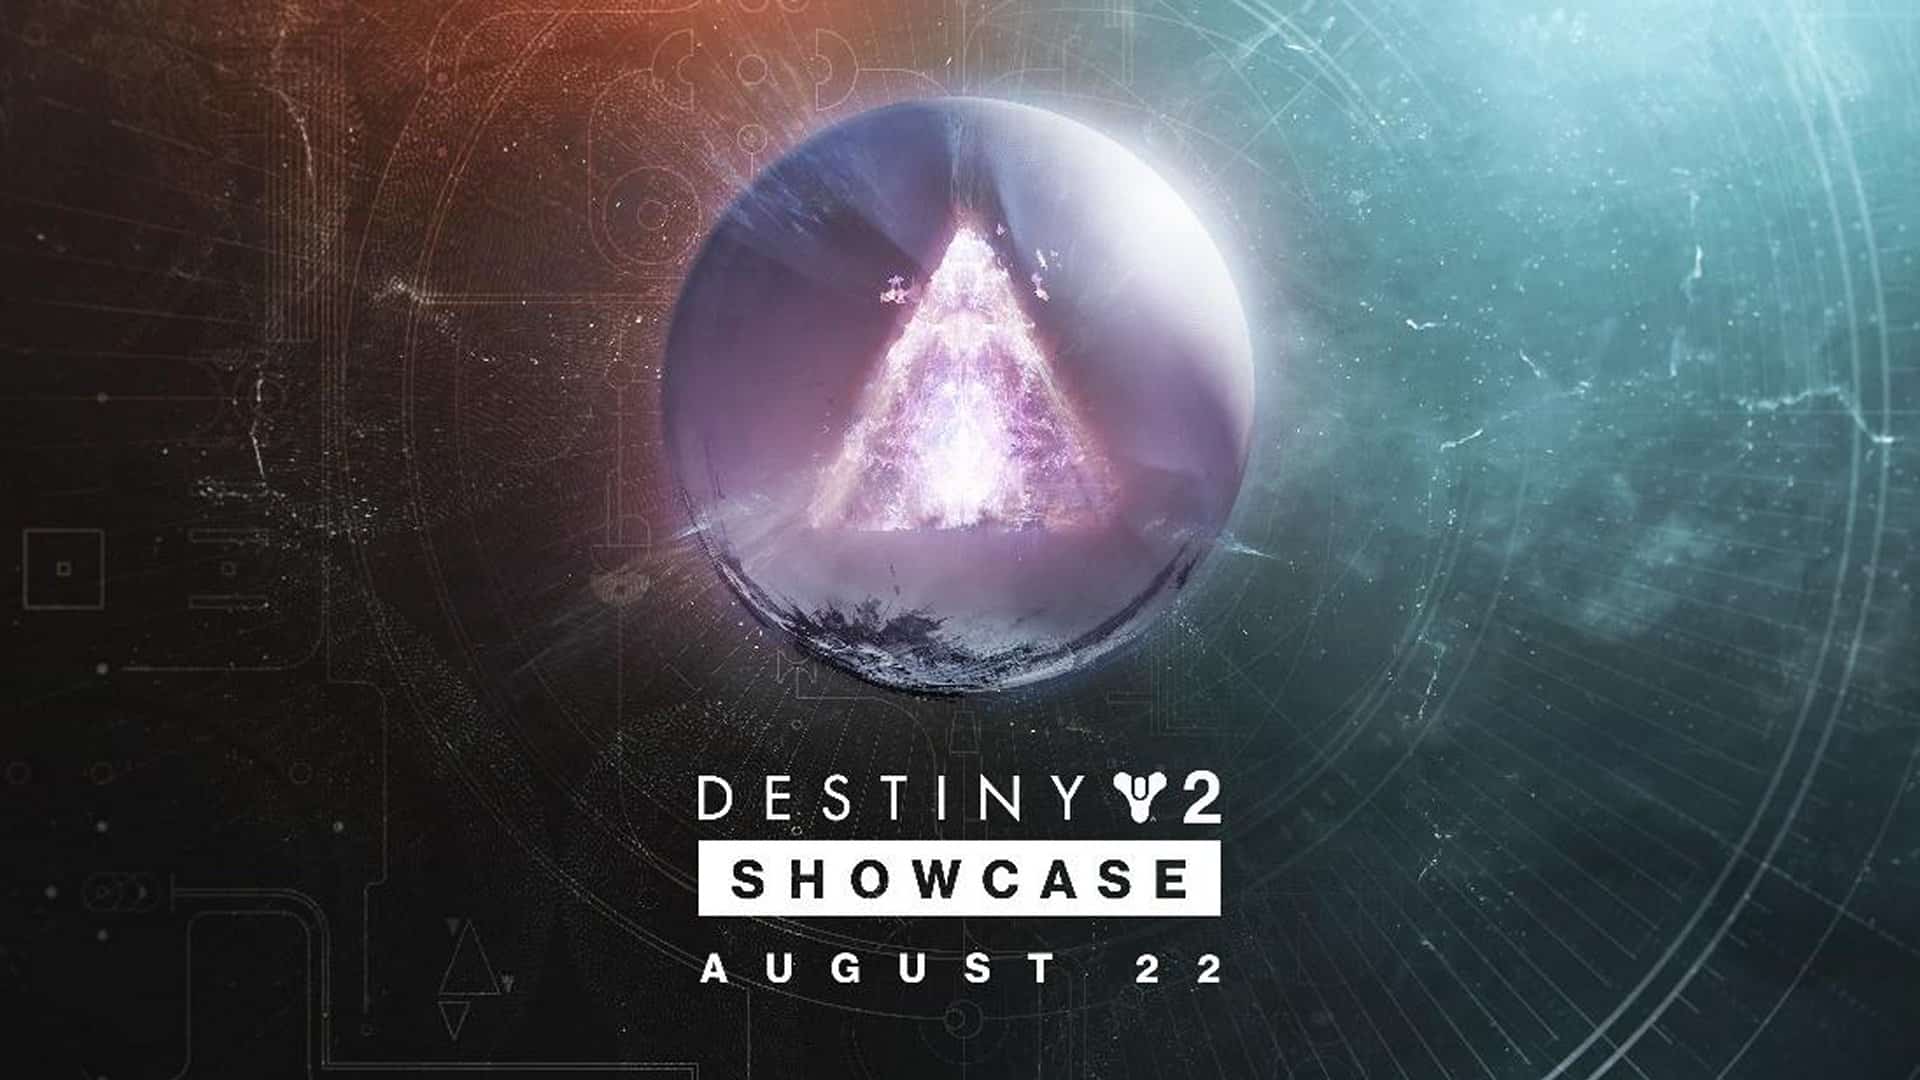 Destiny 2 Showcase Coming August 22 With Expansion Reveal and Next Year Plans